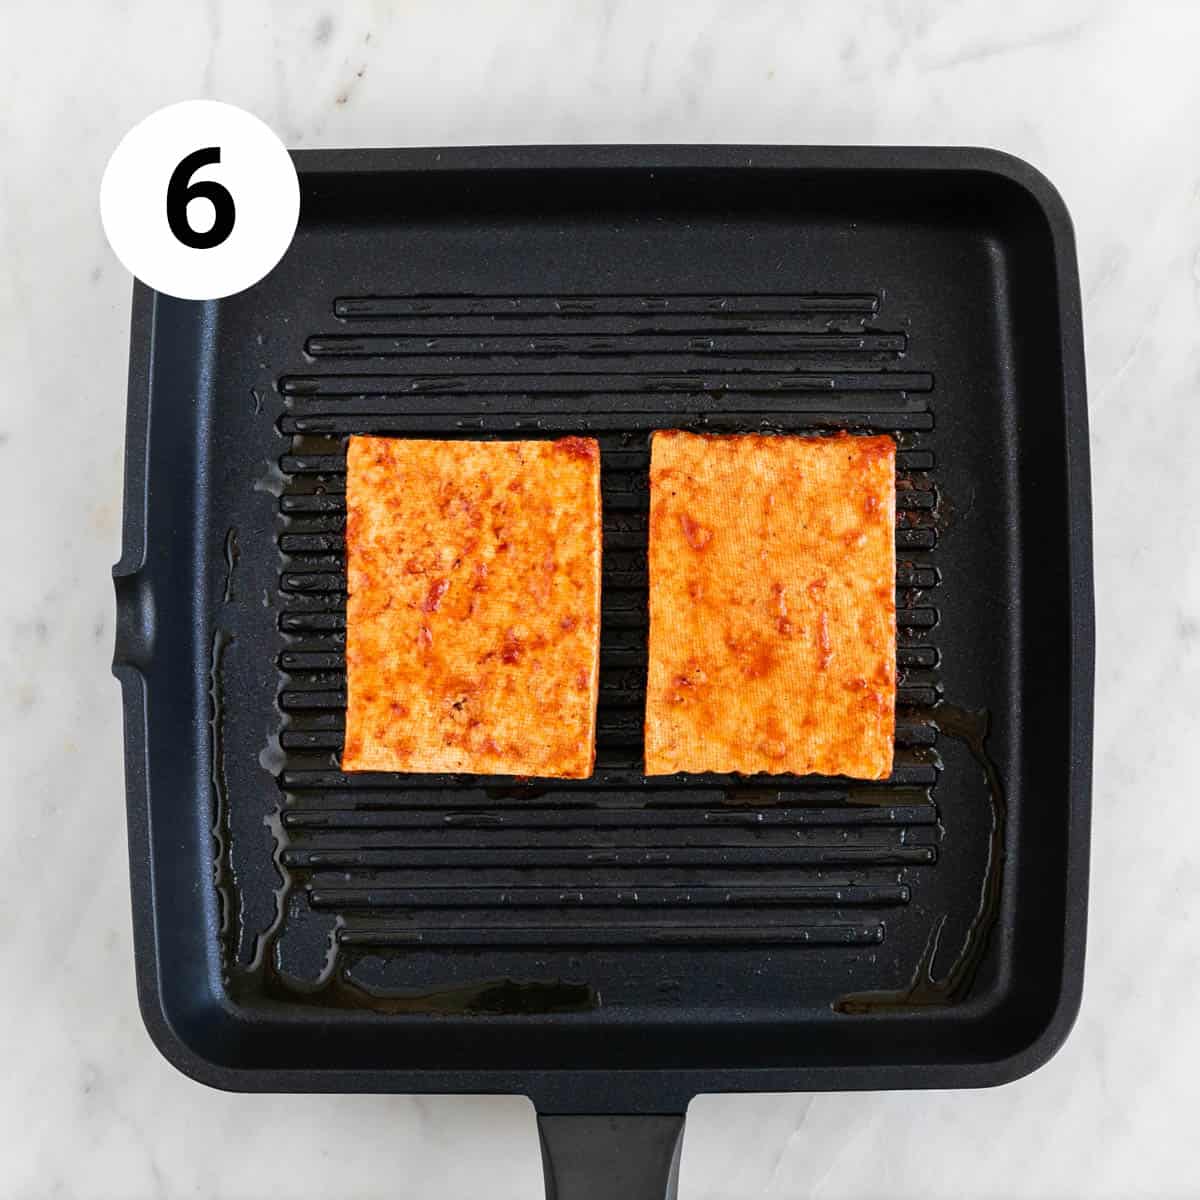 Two tofu steaks cooking in a grill pan.